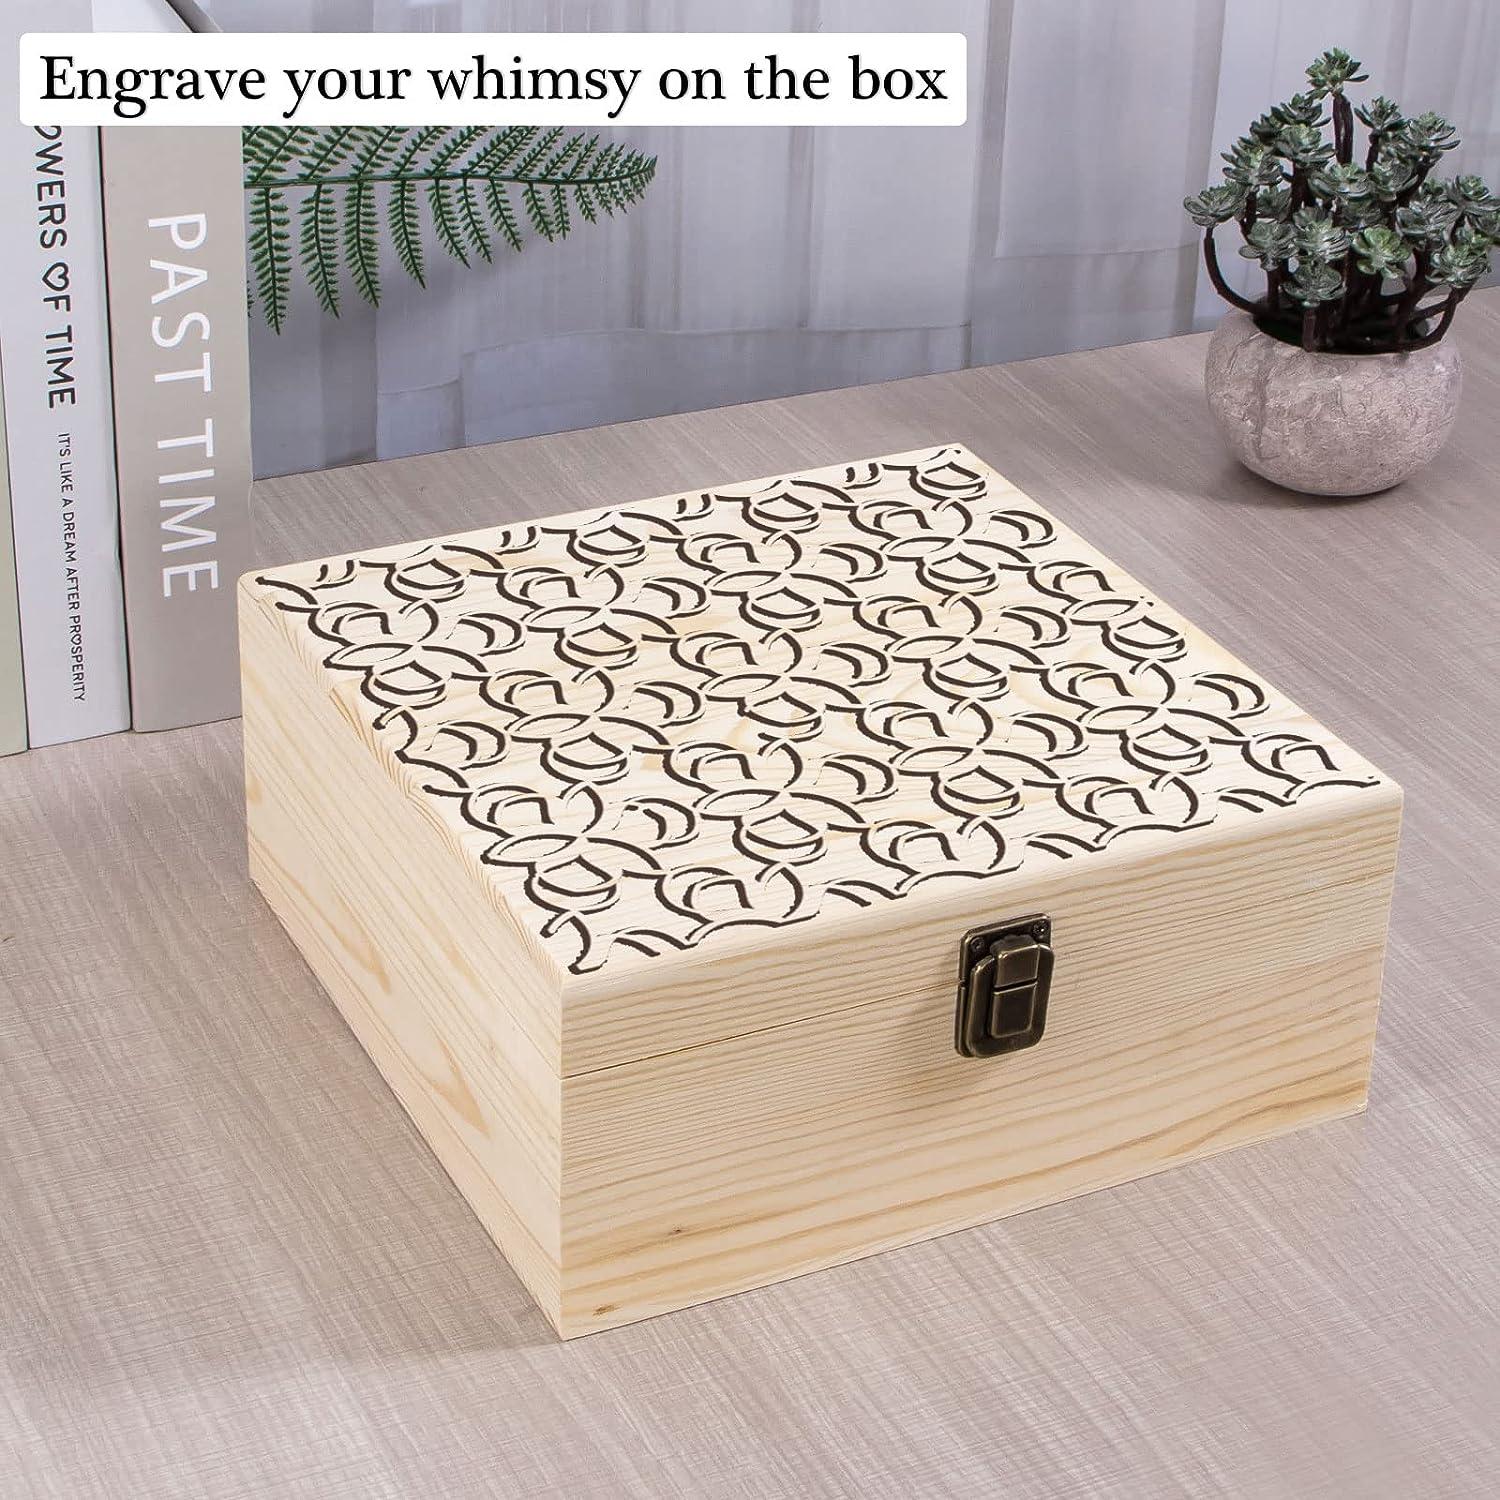 Useekoo Unfinished Wooden Storage Box with Hinged Lid 9.1'' x 9.1'' x 3.9''  Large Keepsake Box Rustic Wood Gift Boxes for Jewelry Art Hobbies DIY  lovers and Valentine's Day Decorations Unfinished Wooden